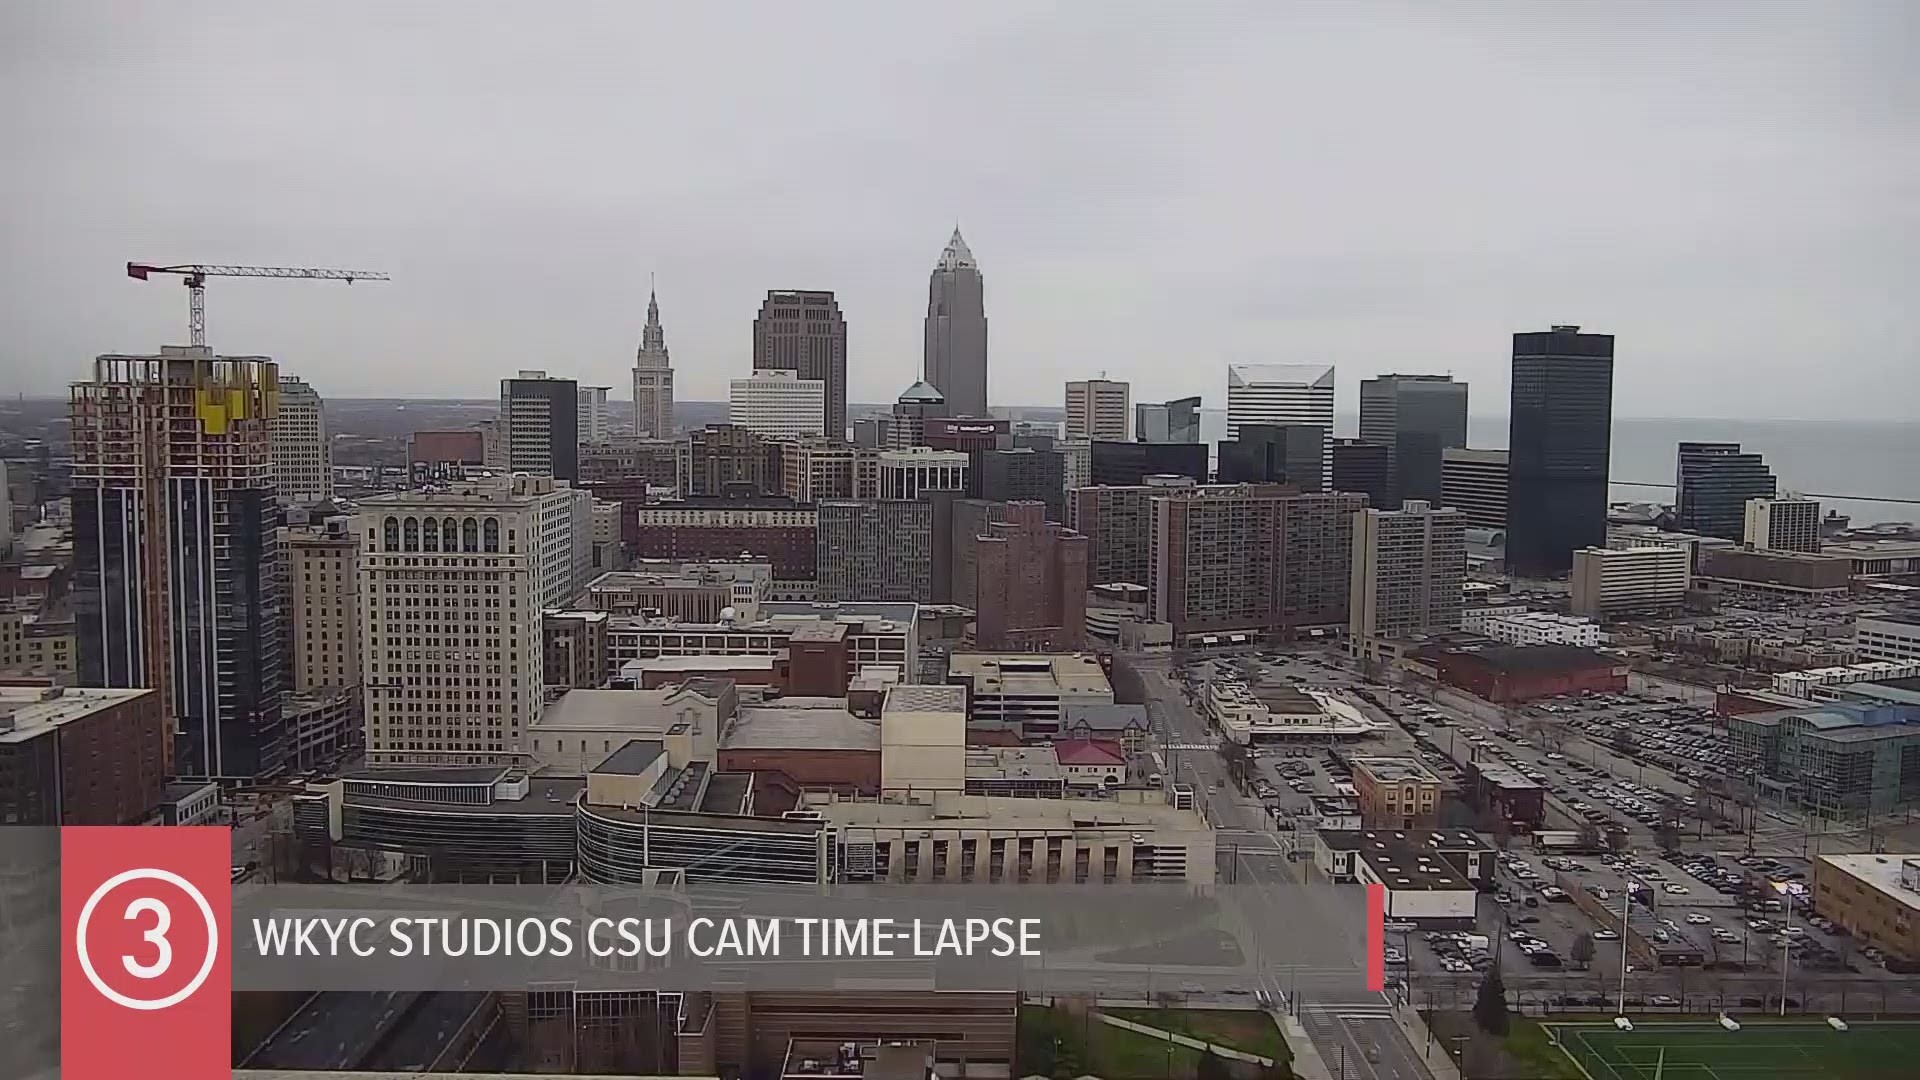 It's FRIDAY! Enjoy our all-day Cleveland weather time-lapse from the WKYC Studios CSU Cam and have a great weekend friends! Live for the moment. #3weather